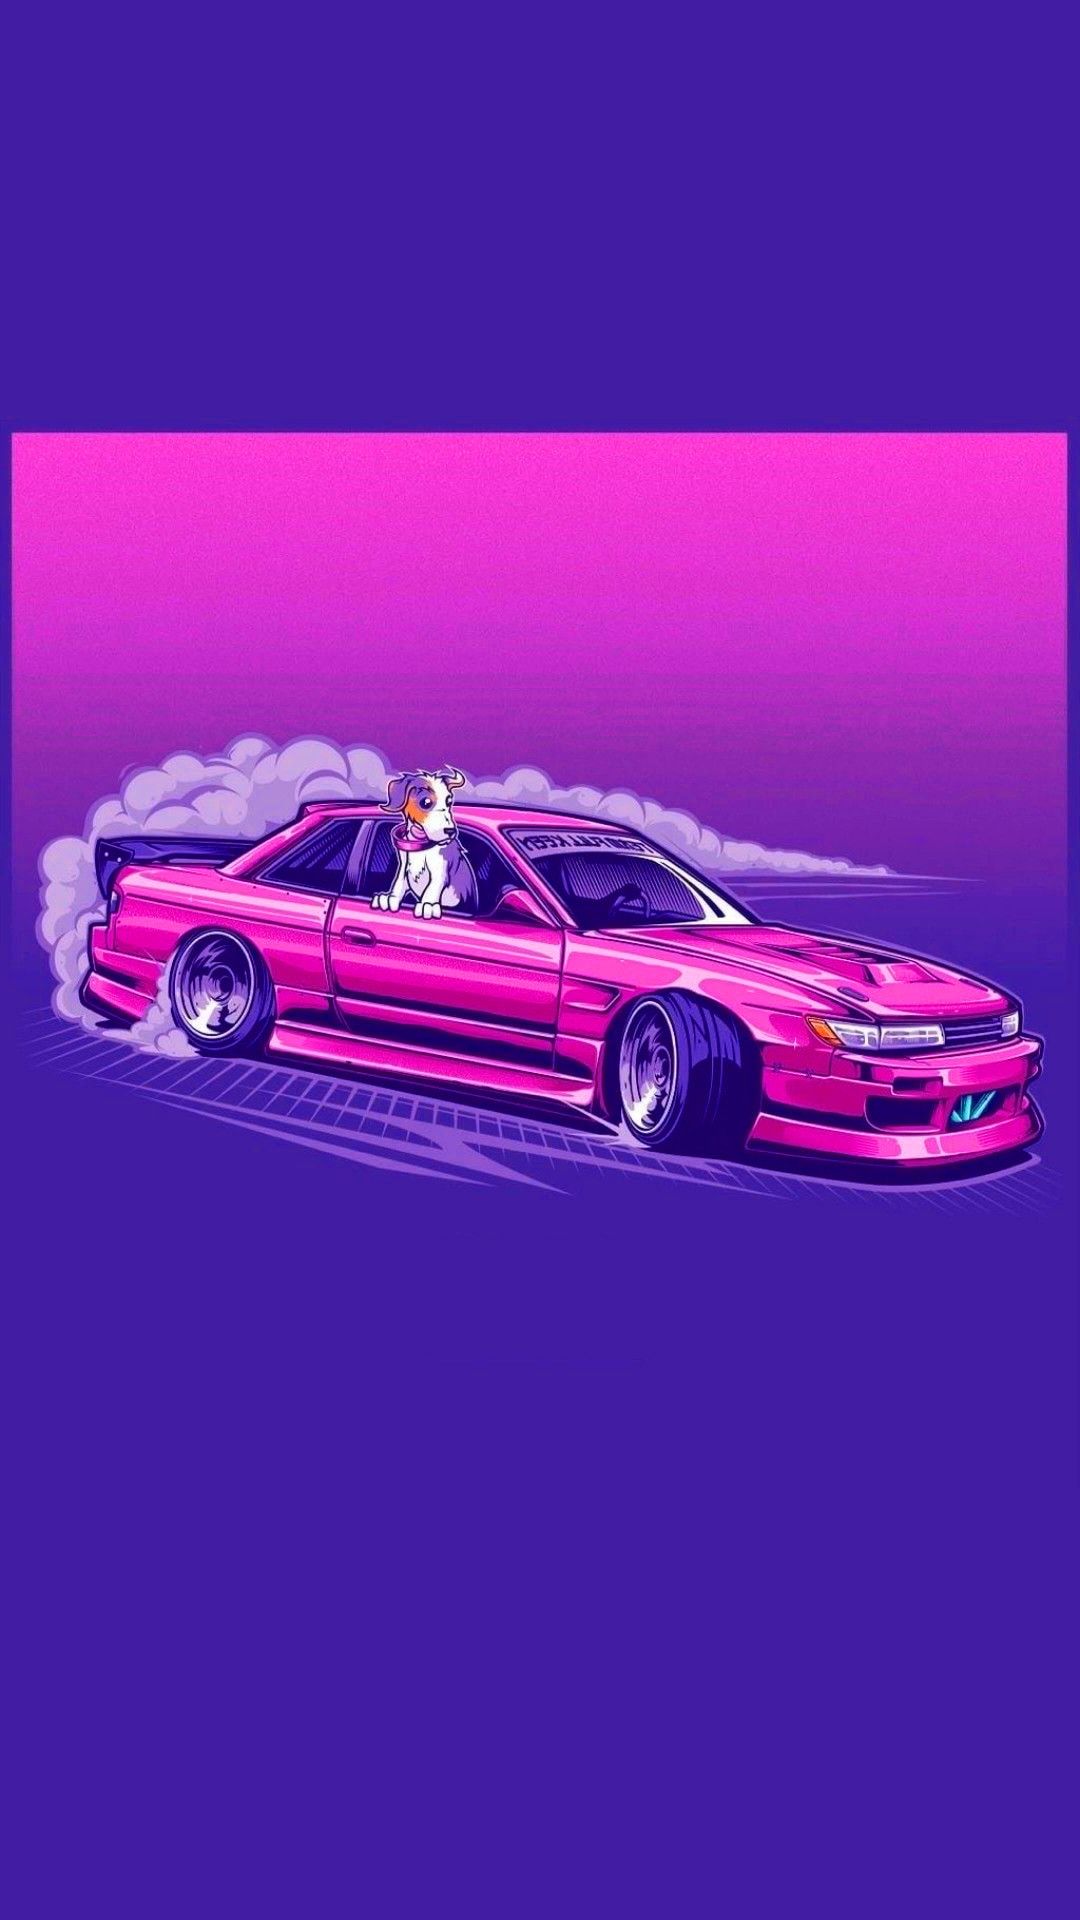 Anime JDM Aesthetic Wallpapers - Wallpaper Cave